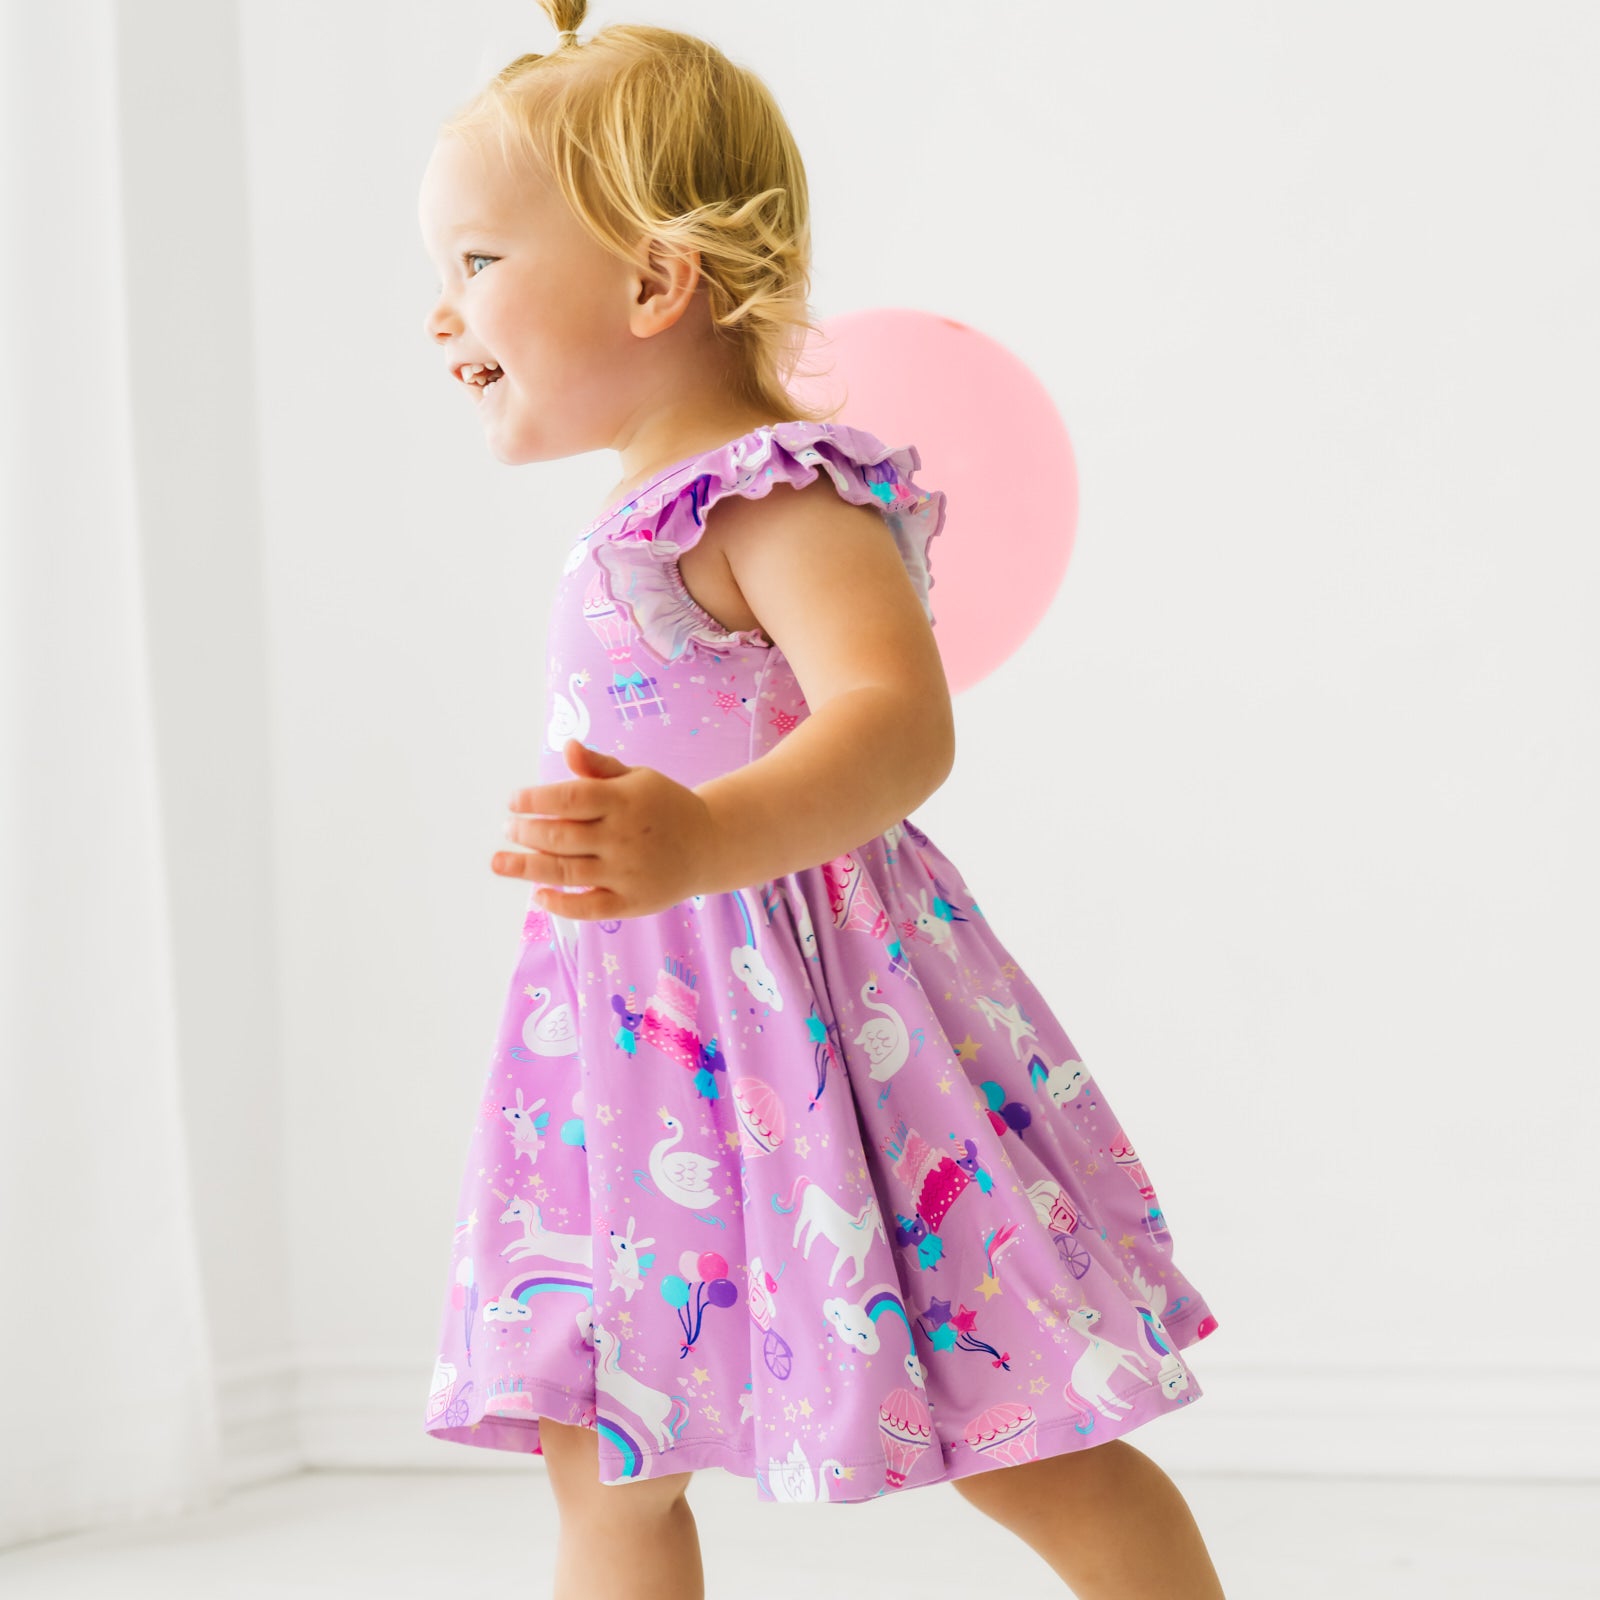 Alternate profile view of a child playing wearing a Magical Birthday flutter twirl dress with bodysuit